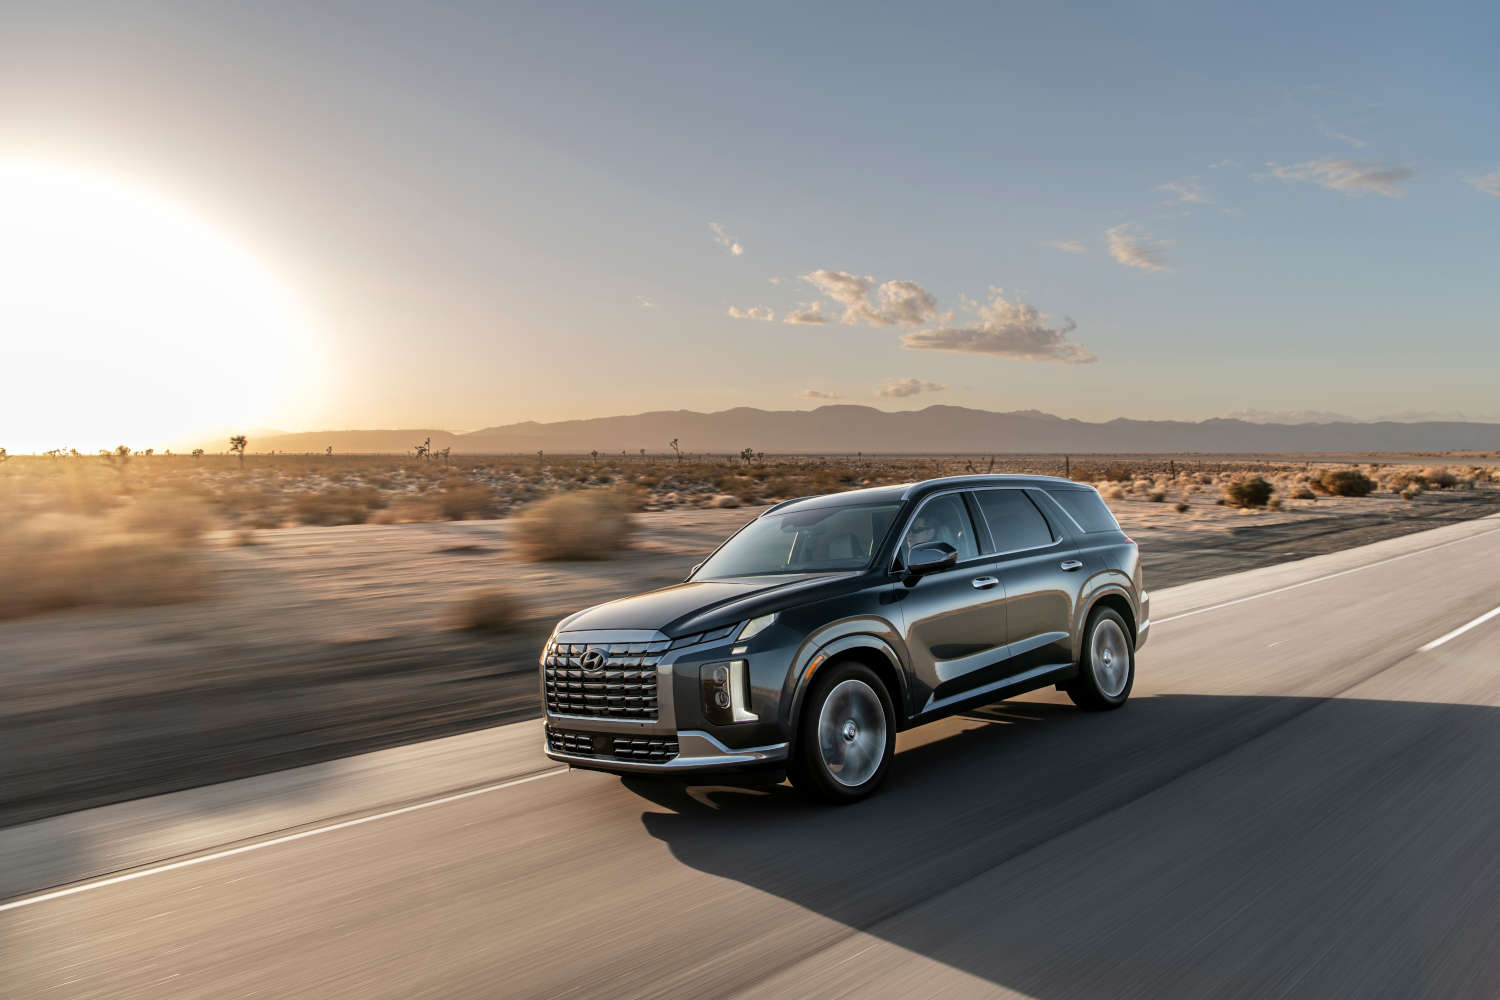 Drivers are passing up the Kia Telluride for this Hyundai Palisade